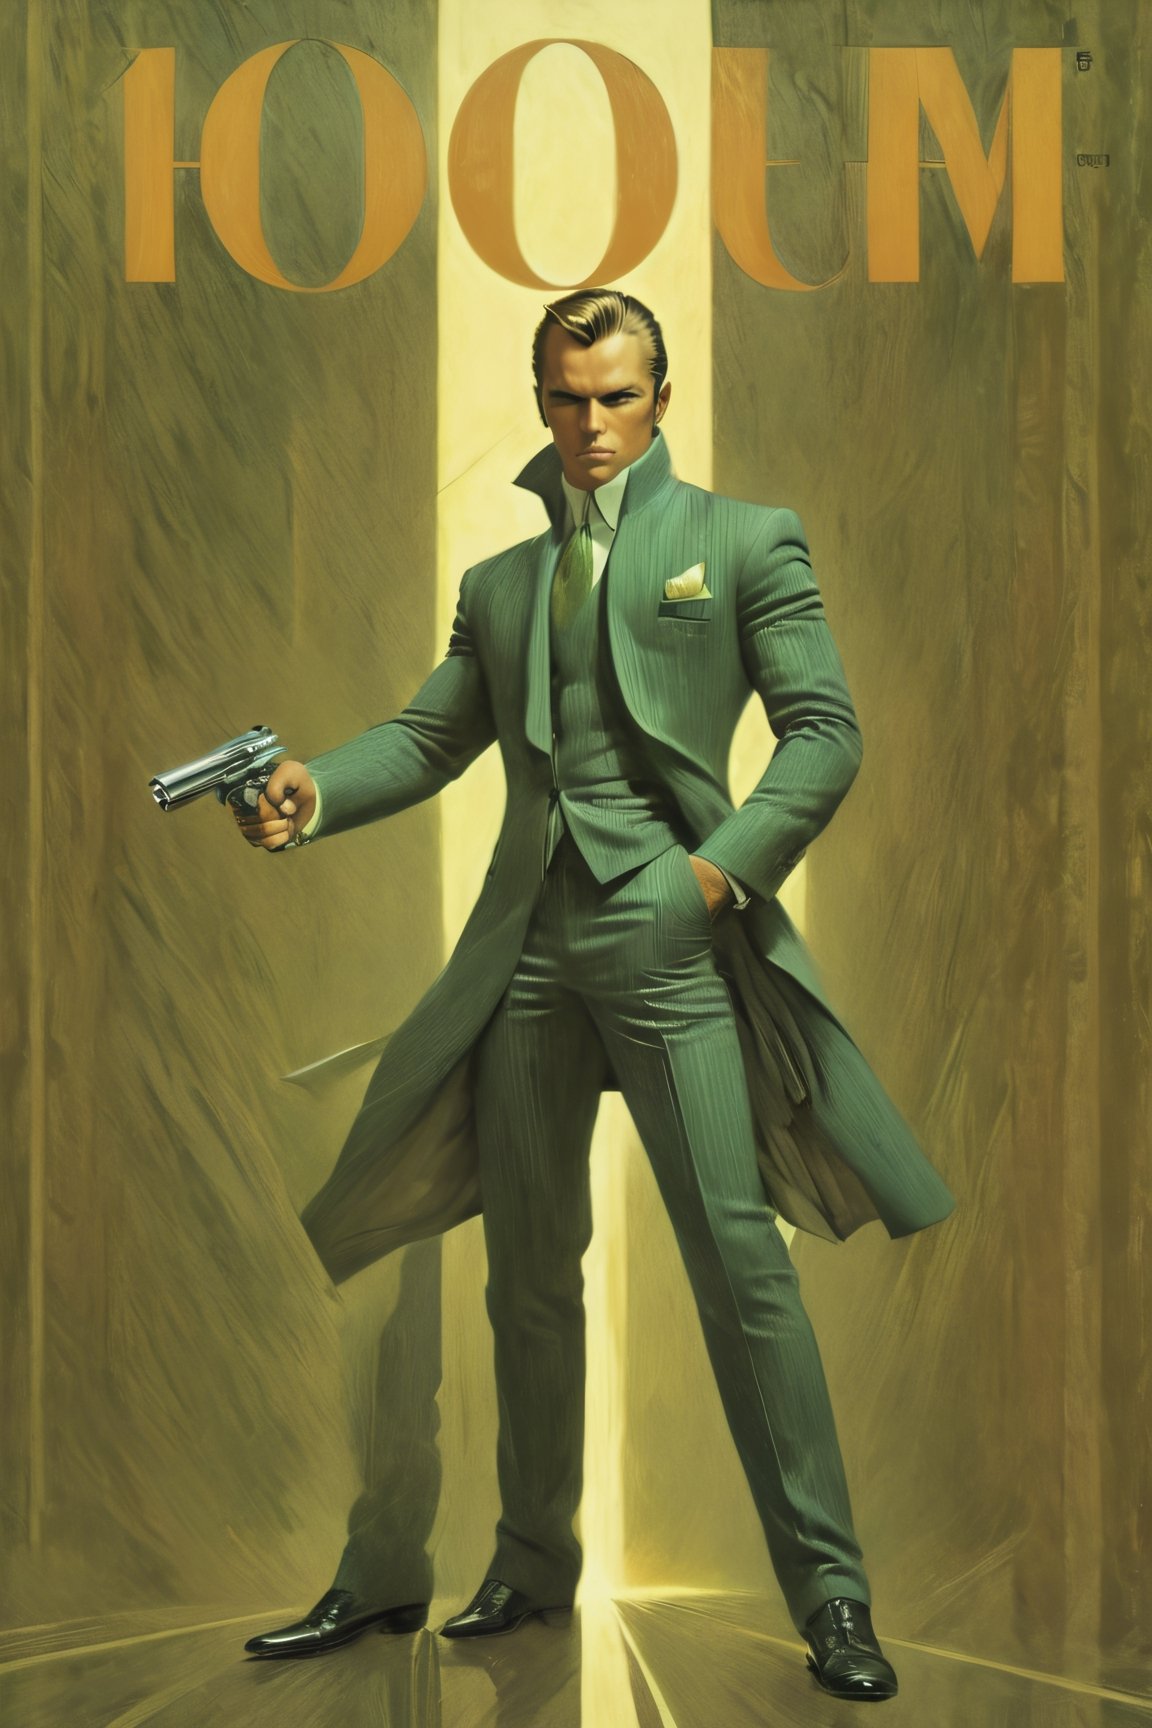 art by Masamune Shirow, art by J.C. Leyendecker, art by boris vallejo, a masterpiece, stunning beauty, hyper-realistic oil painting, vibrant colors, a James Bond type character, dark chiarascuro lighting, aiming a Luger pistol at the viewer, fighting bad guys, driving an Aston Martin, a telephoto shot, 1000mm lens, f2,8,vertical lines of green matrix code